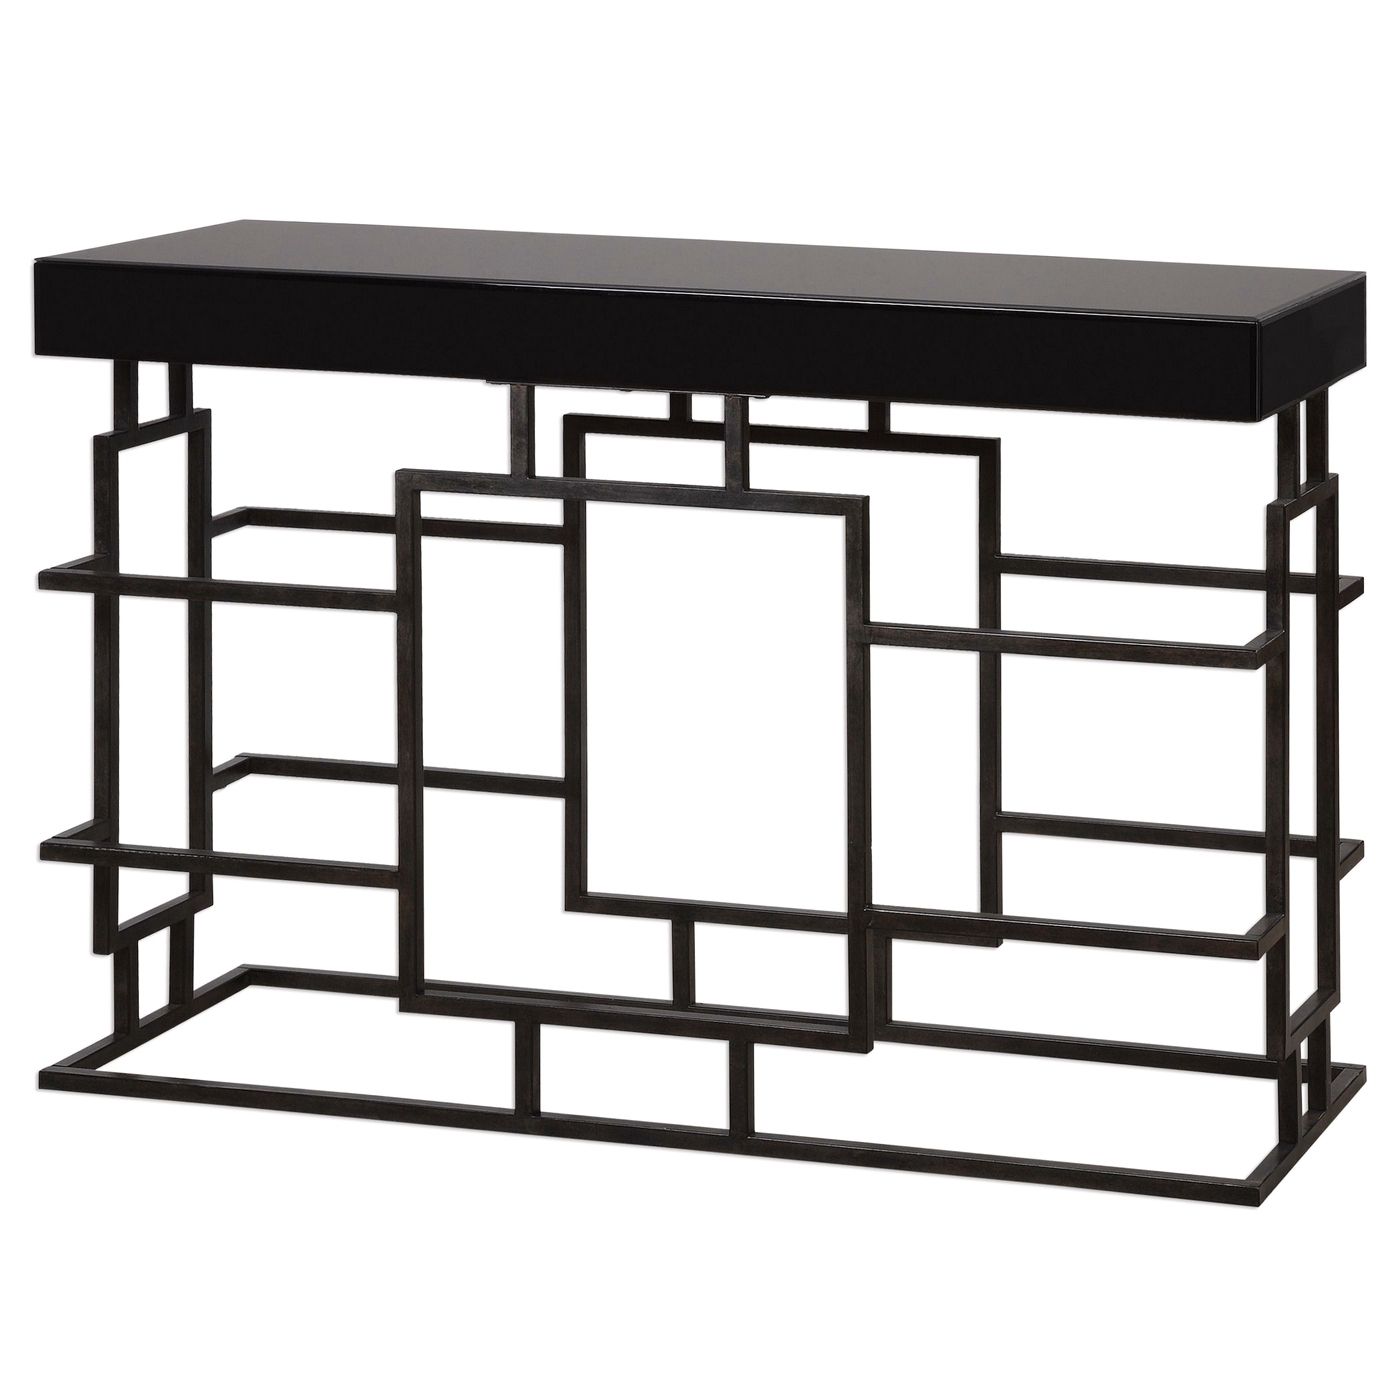 Andy Stylish Black Console Table In Geometric Iron Frame Within Aged Black Iron Console Tables (View 14 of 20)